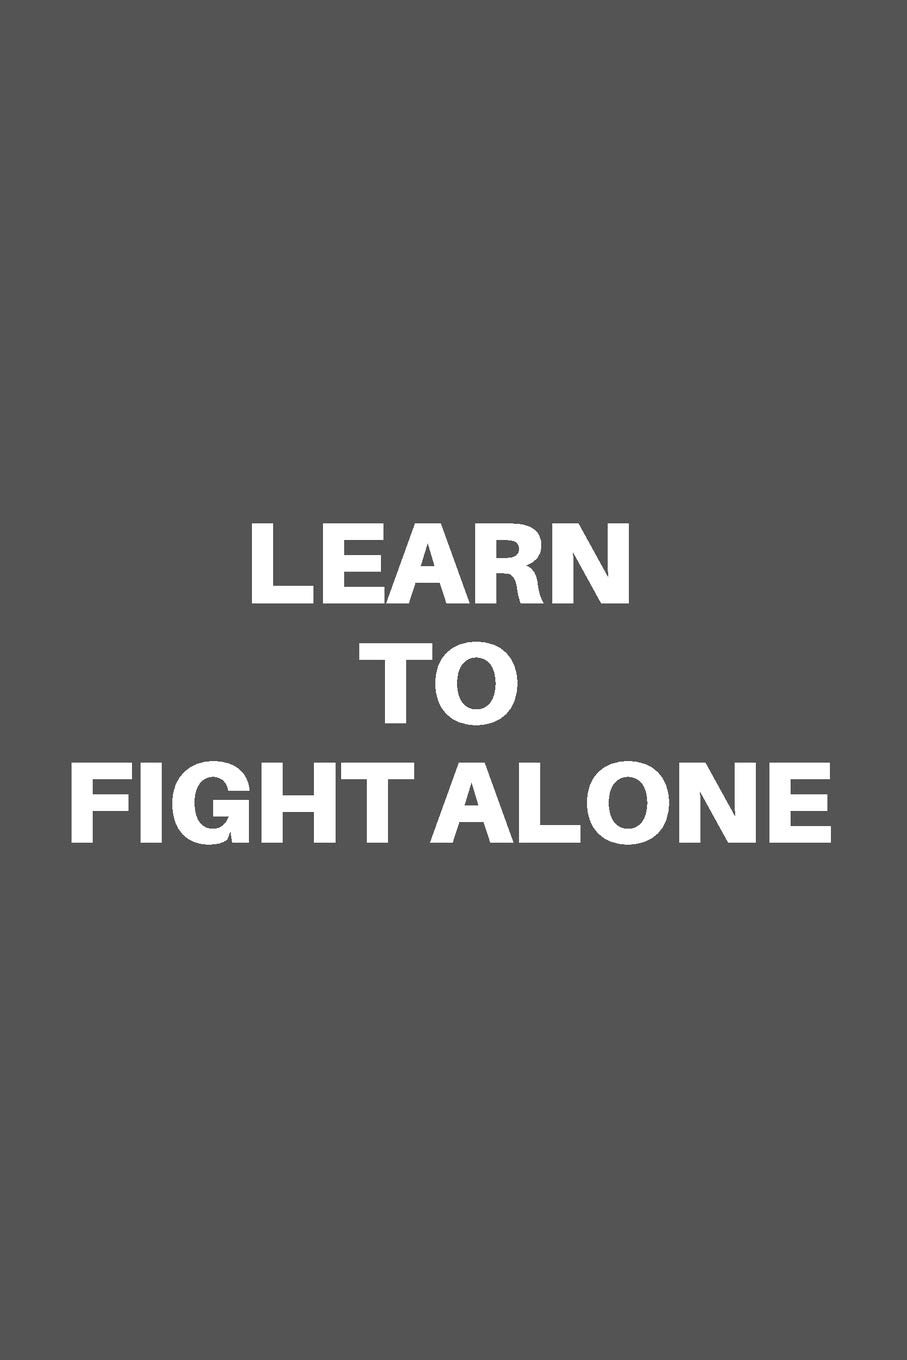 Buy Learn To Fight Alone: Motivational Quote Notebook Journal For 120 Pages Of 6'x9' Lined Book Online At Low Prices In India. Learn To Fight Alone: Motivational Quote Notebook Journal For 120 Pages